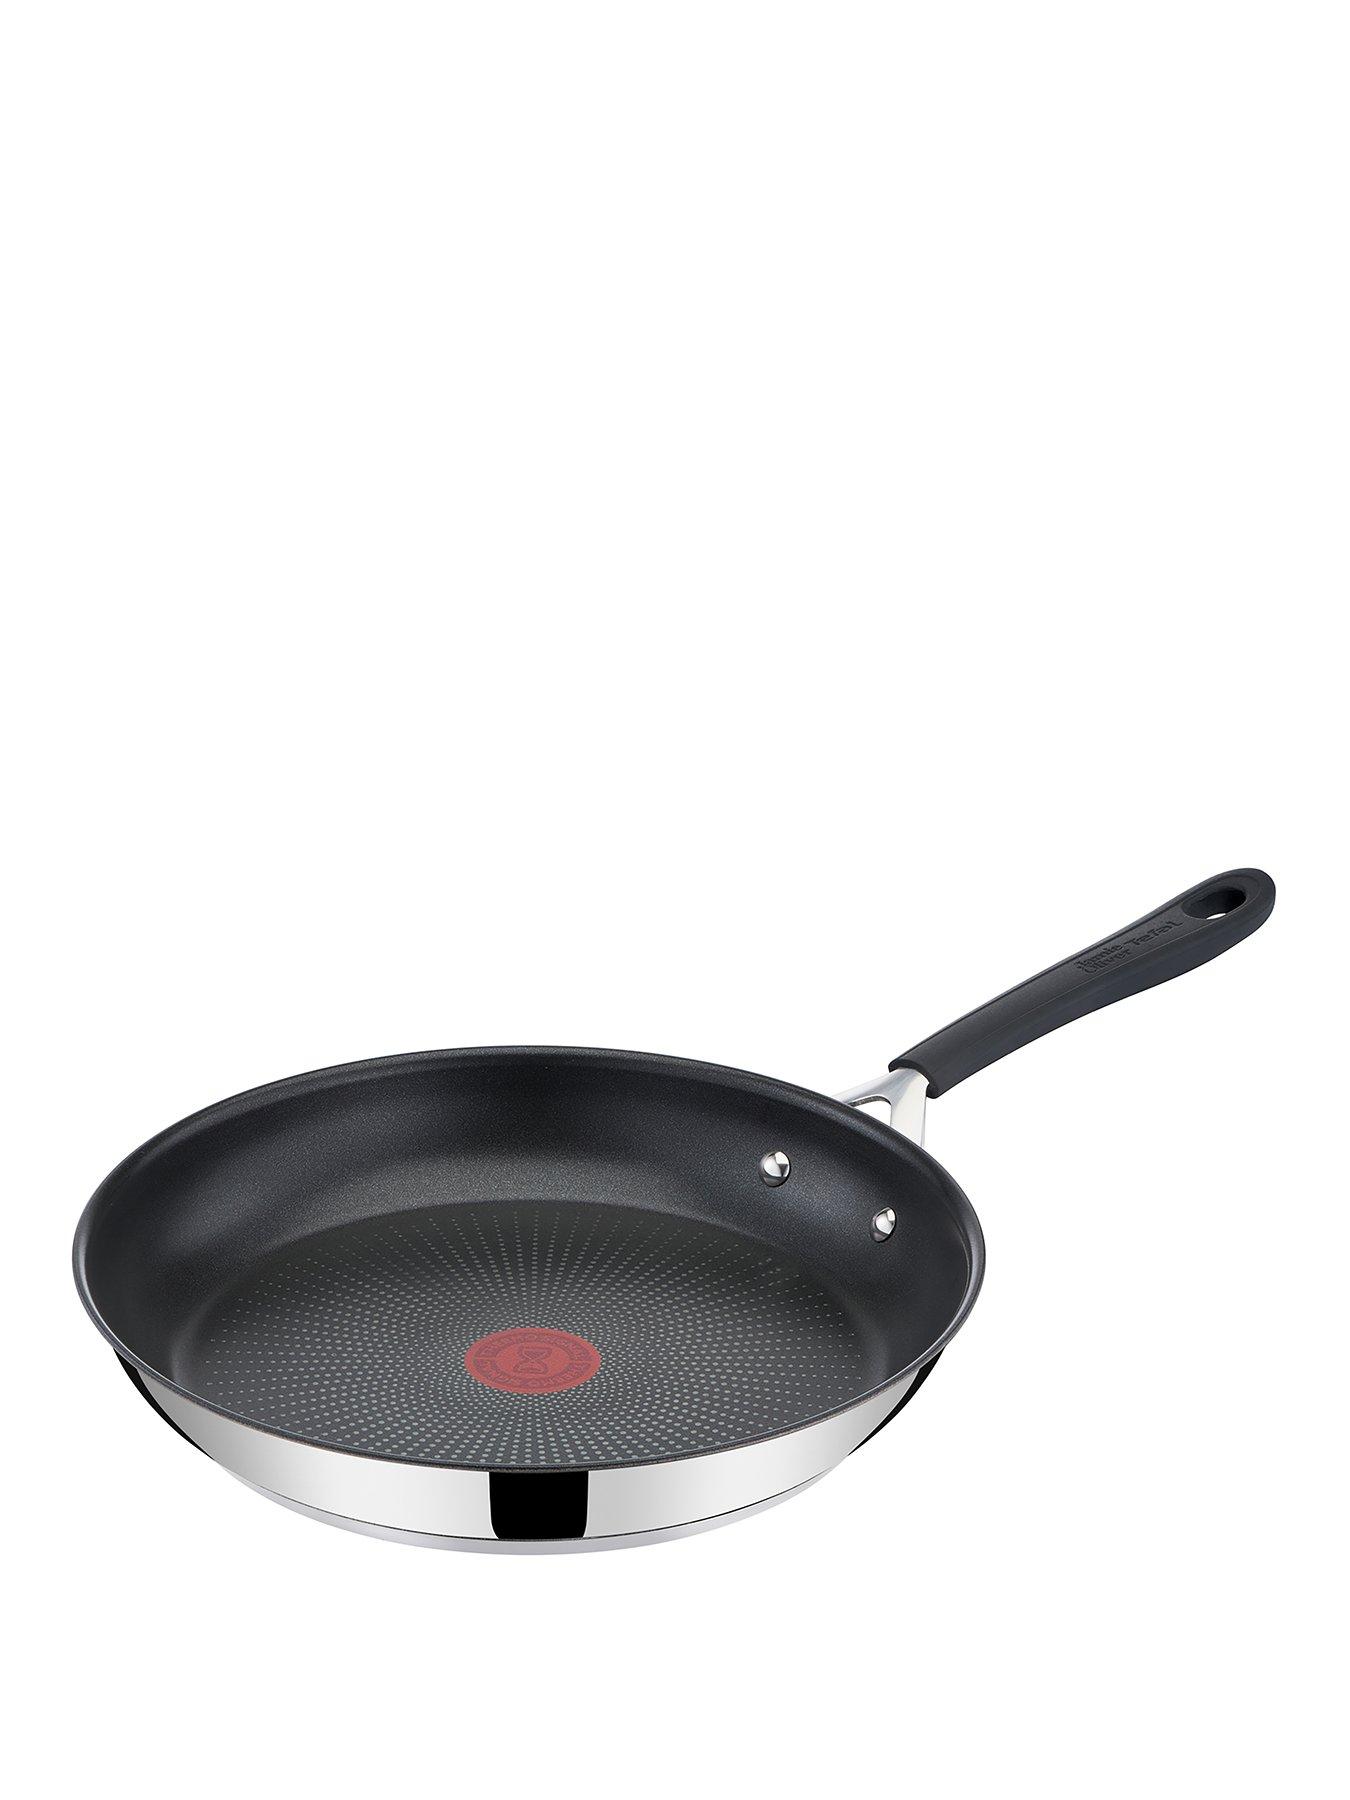 https://media.very.co.uk/i/very/VLJP0_SQ1_0000000088_NO_COLOR_SLf/tefal-jamie-oliver-by-tefal-quick-amp-easy-stainless-steel-non-stick-induction-compatible-28nbspcm-frying-pan.jpg?$180x240_retinamobilex2$&$roundel_very$&p1_img=sale_2017